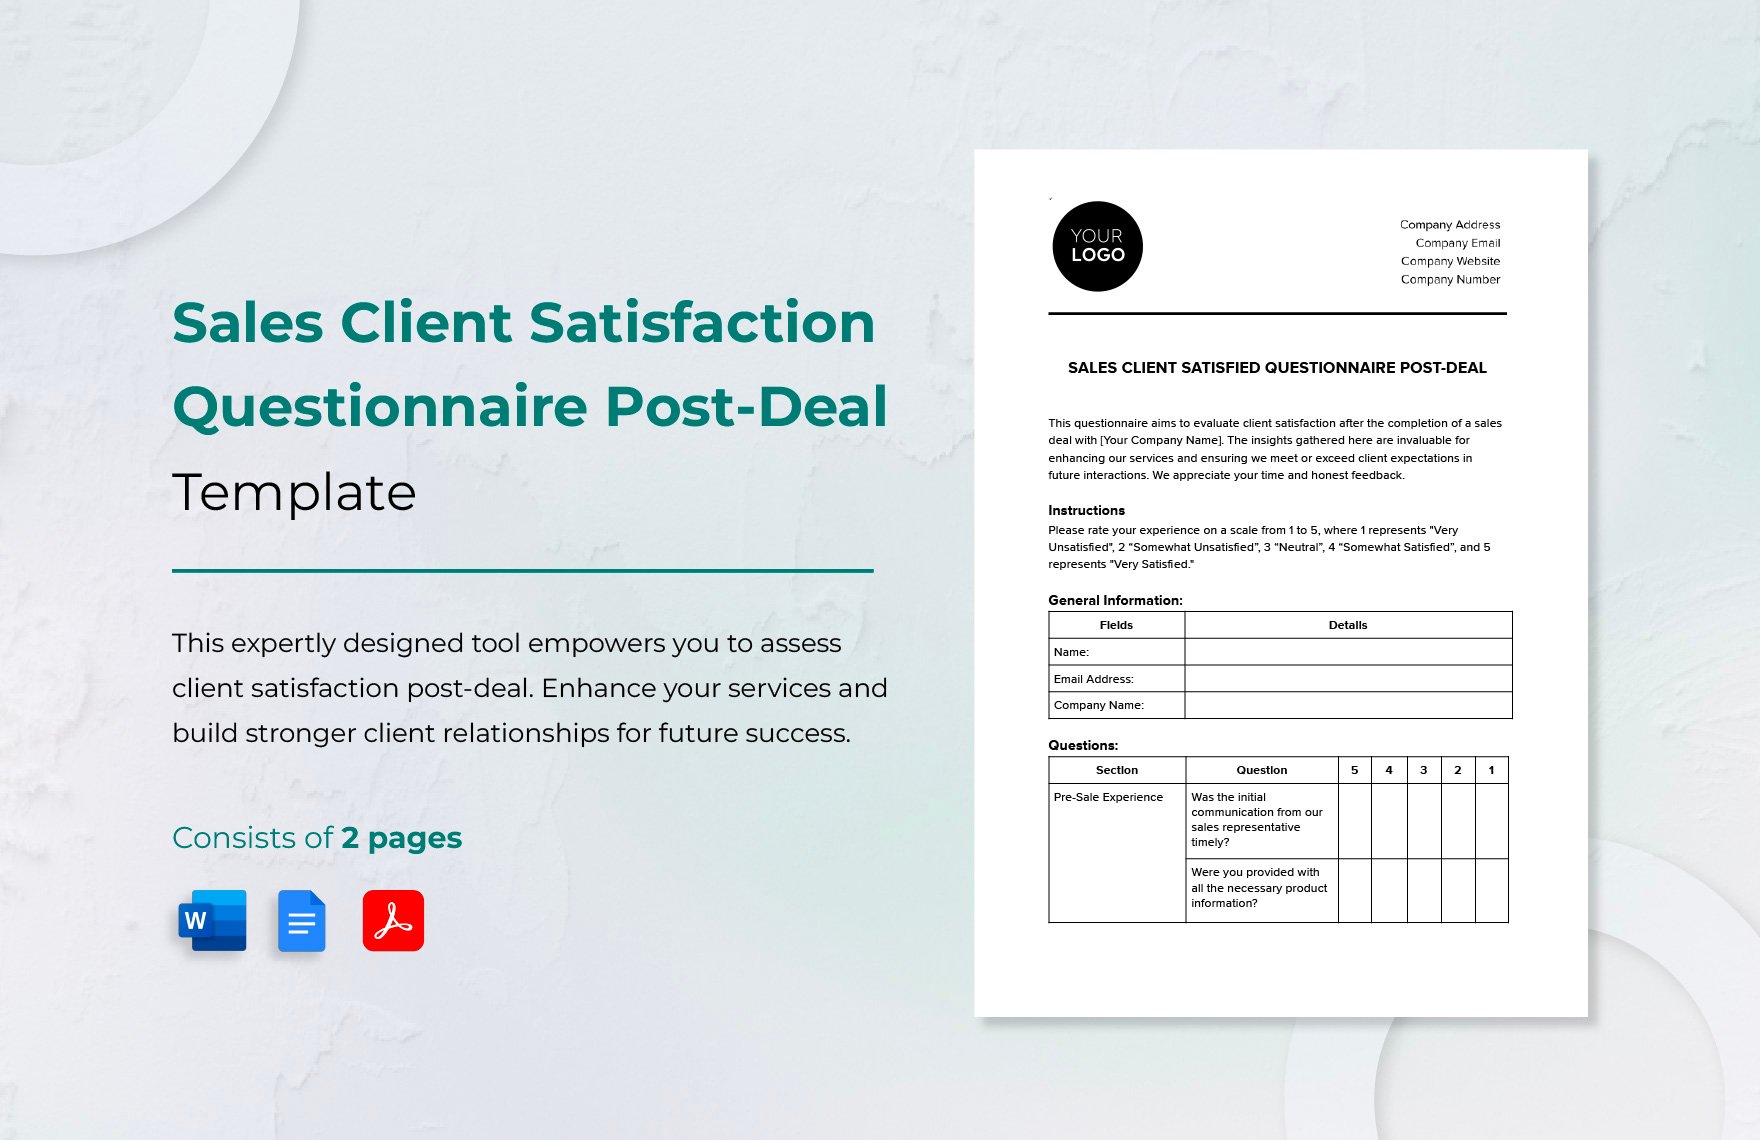 Sales Client Satisfaction Questionnaire Post-Deal Template in Word, Google Docs, PDF